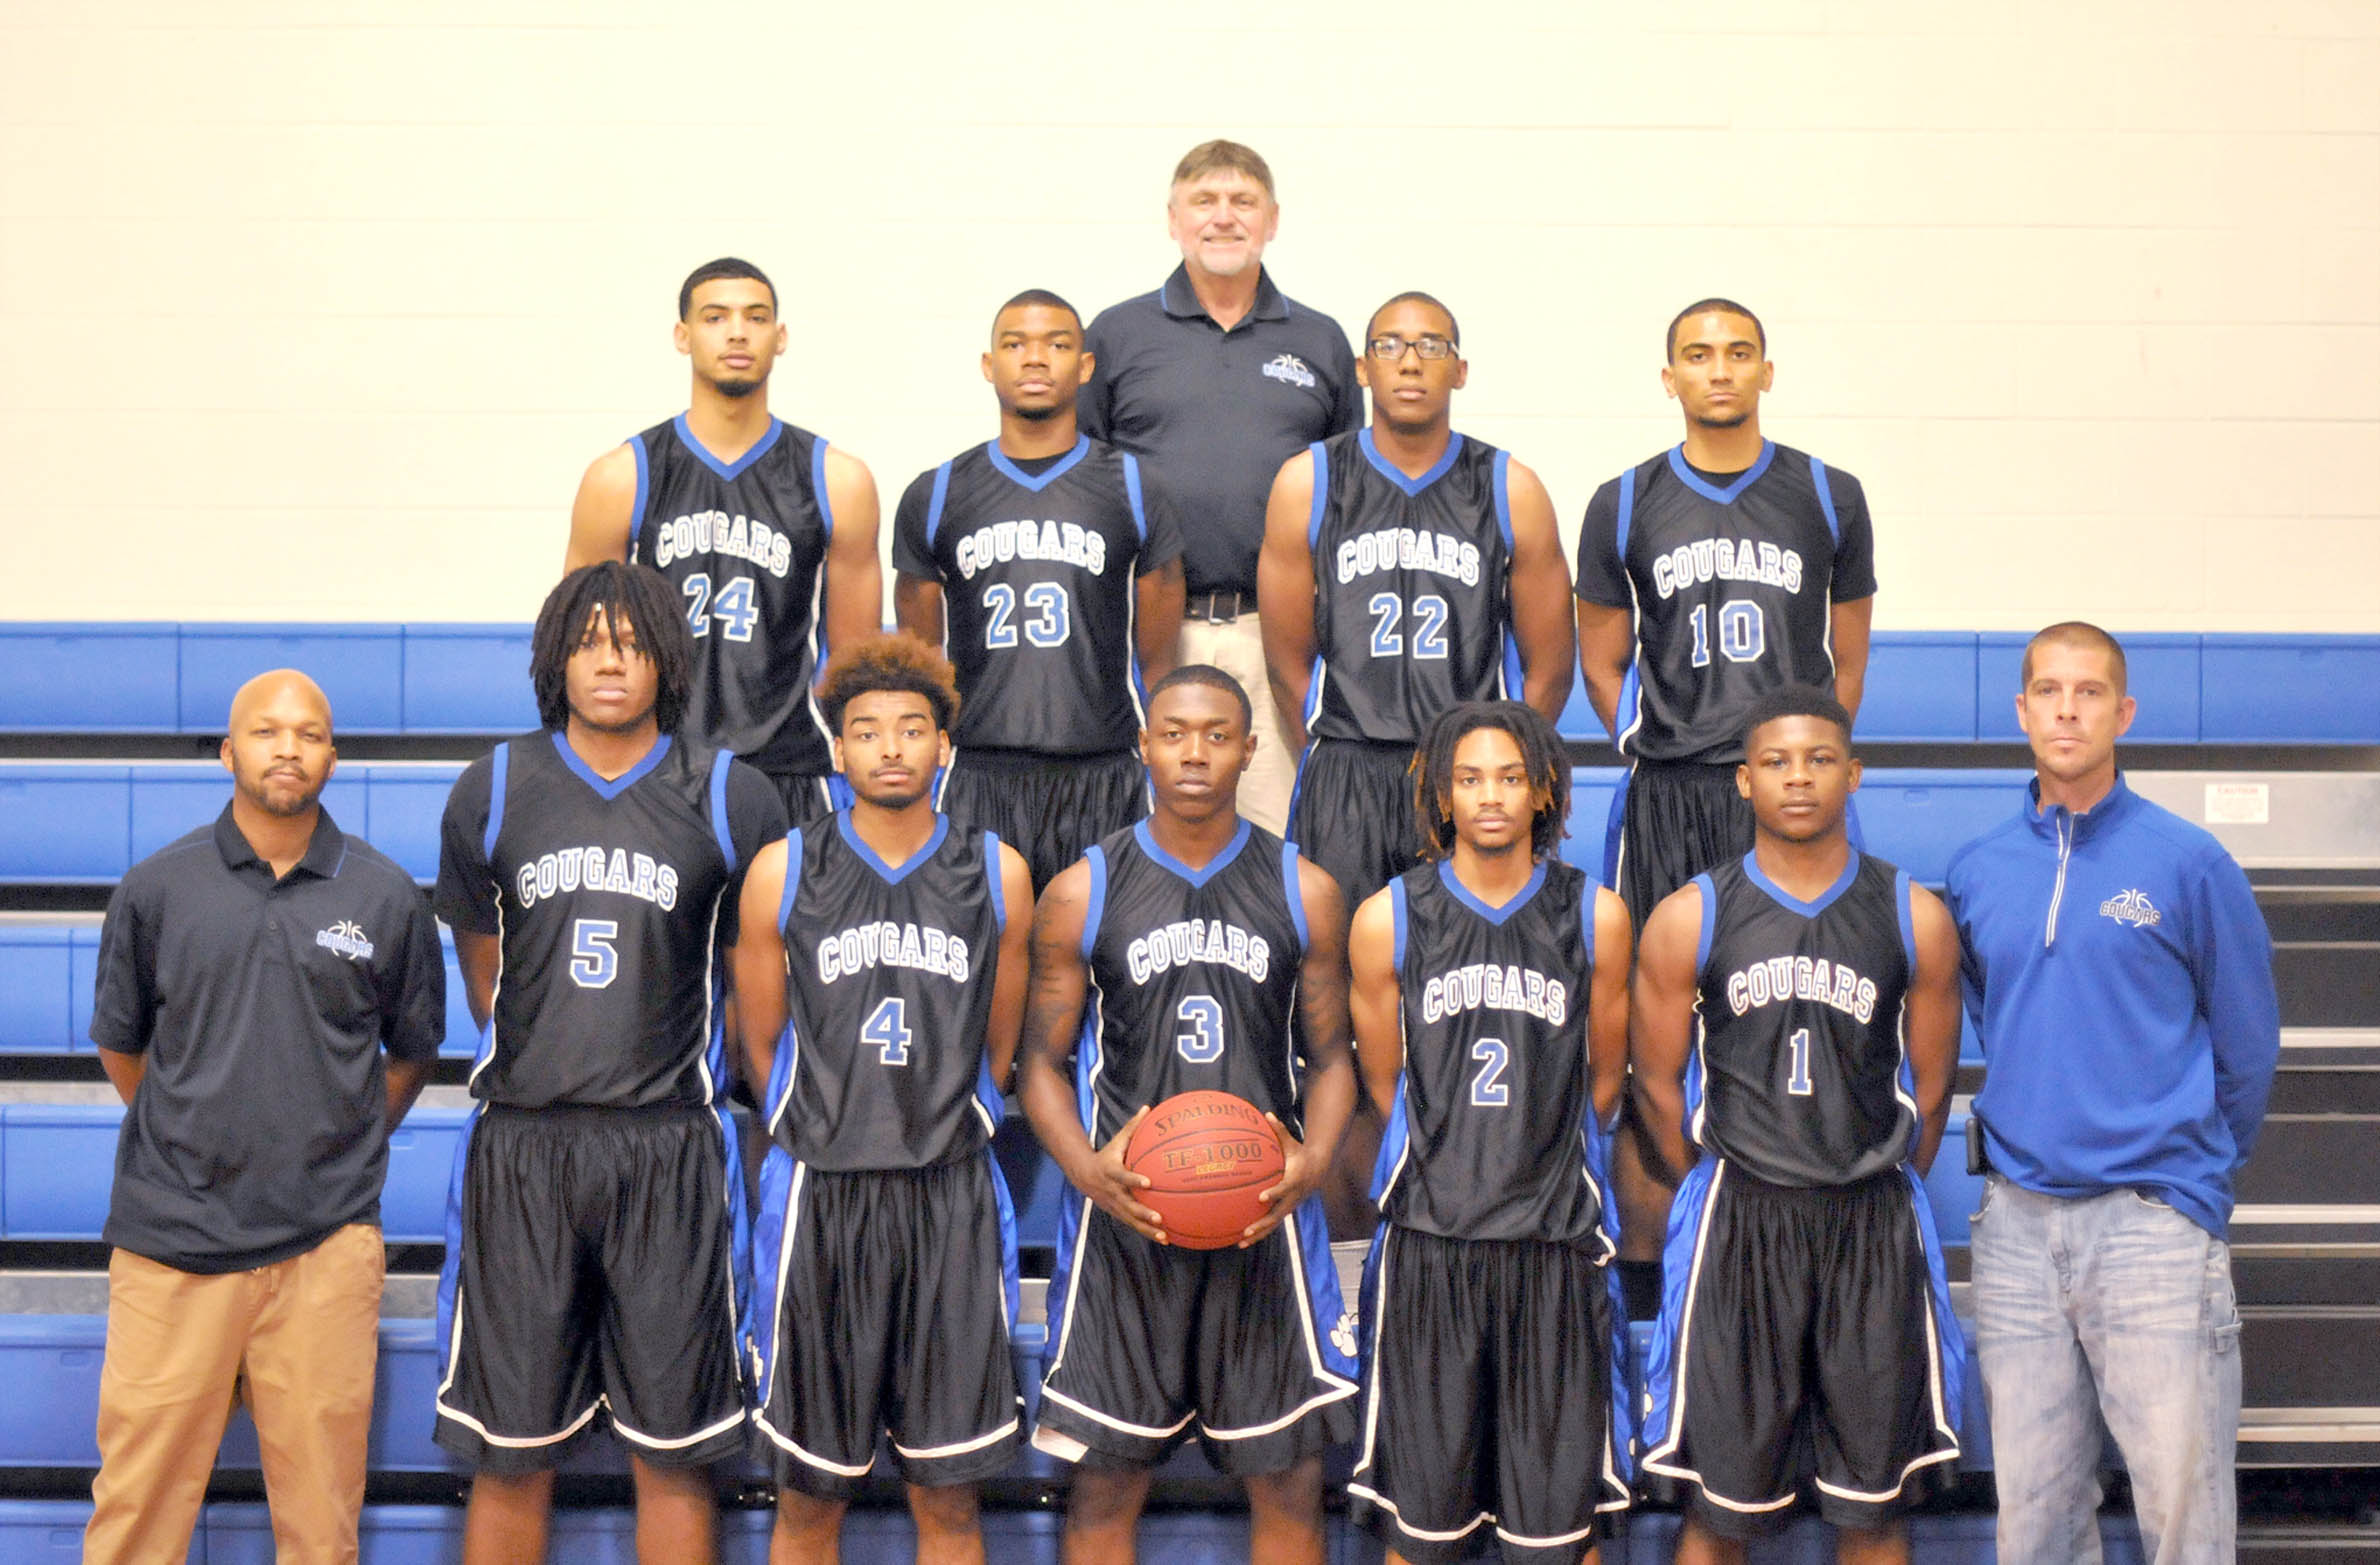 Read the full story, All-around athletes will be strength of CCCC men's basketball team